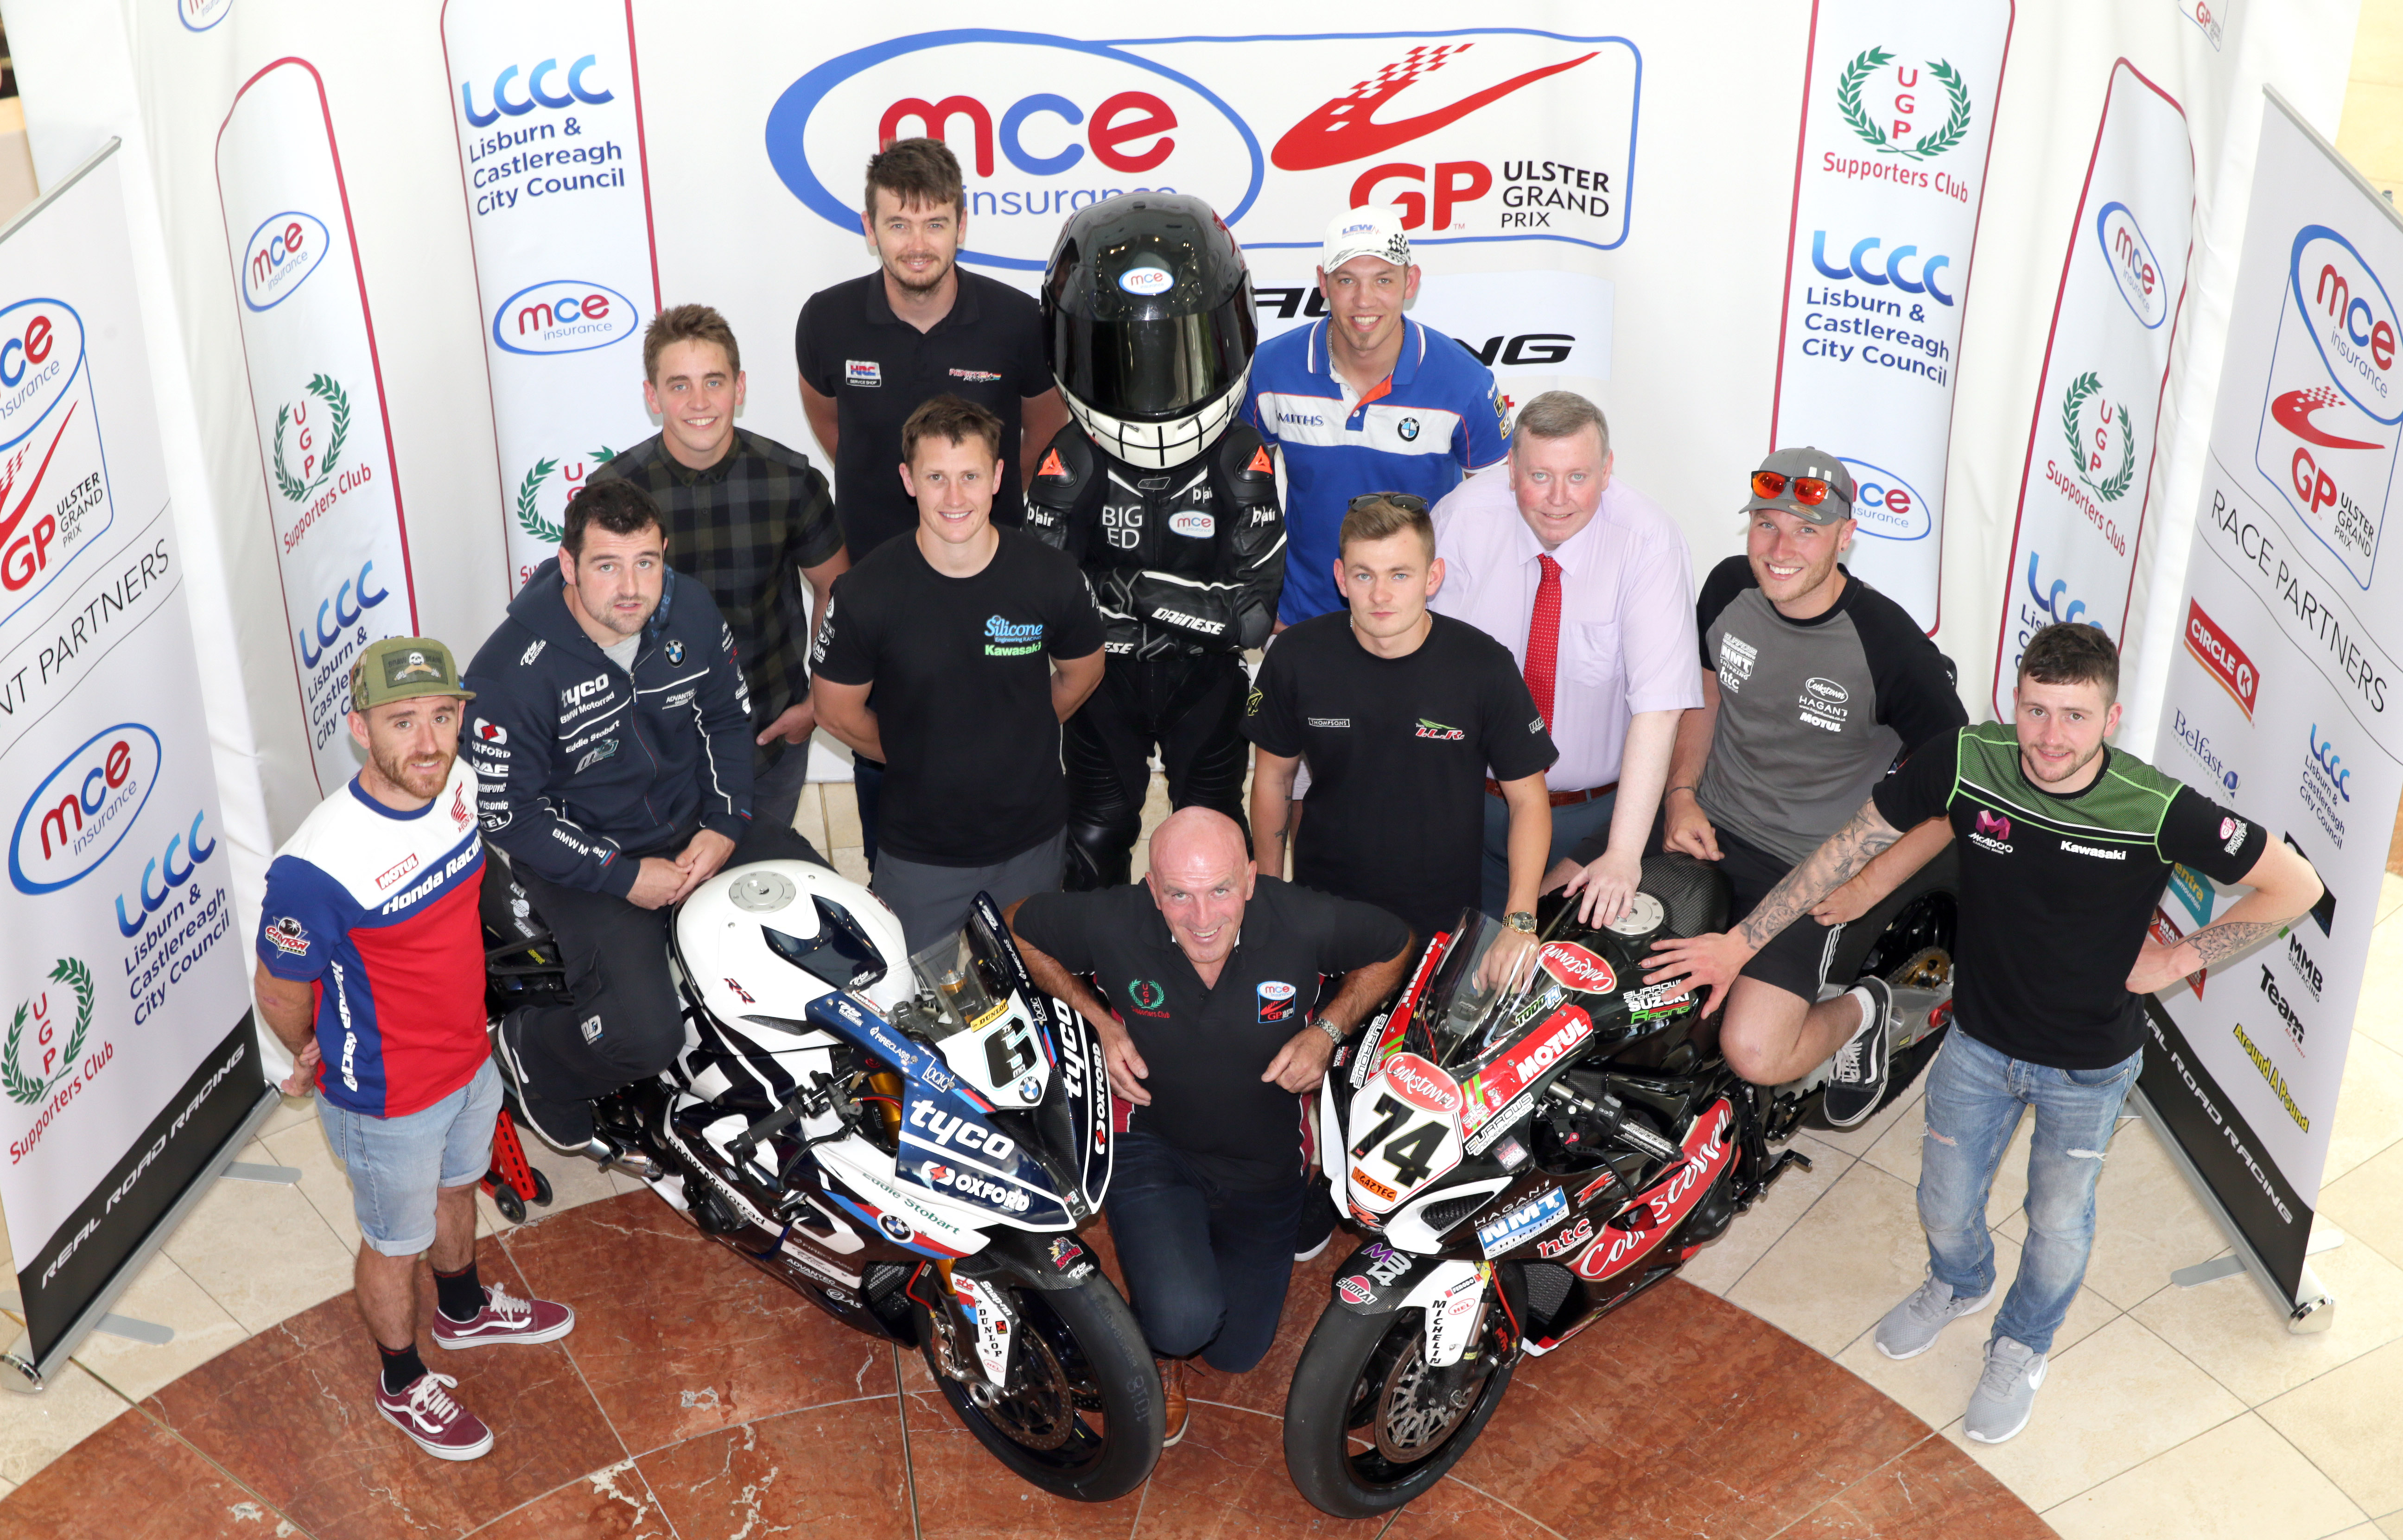 Countdown is on for another epic showdown at the 2018 MCE Ulster Grand Prix